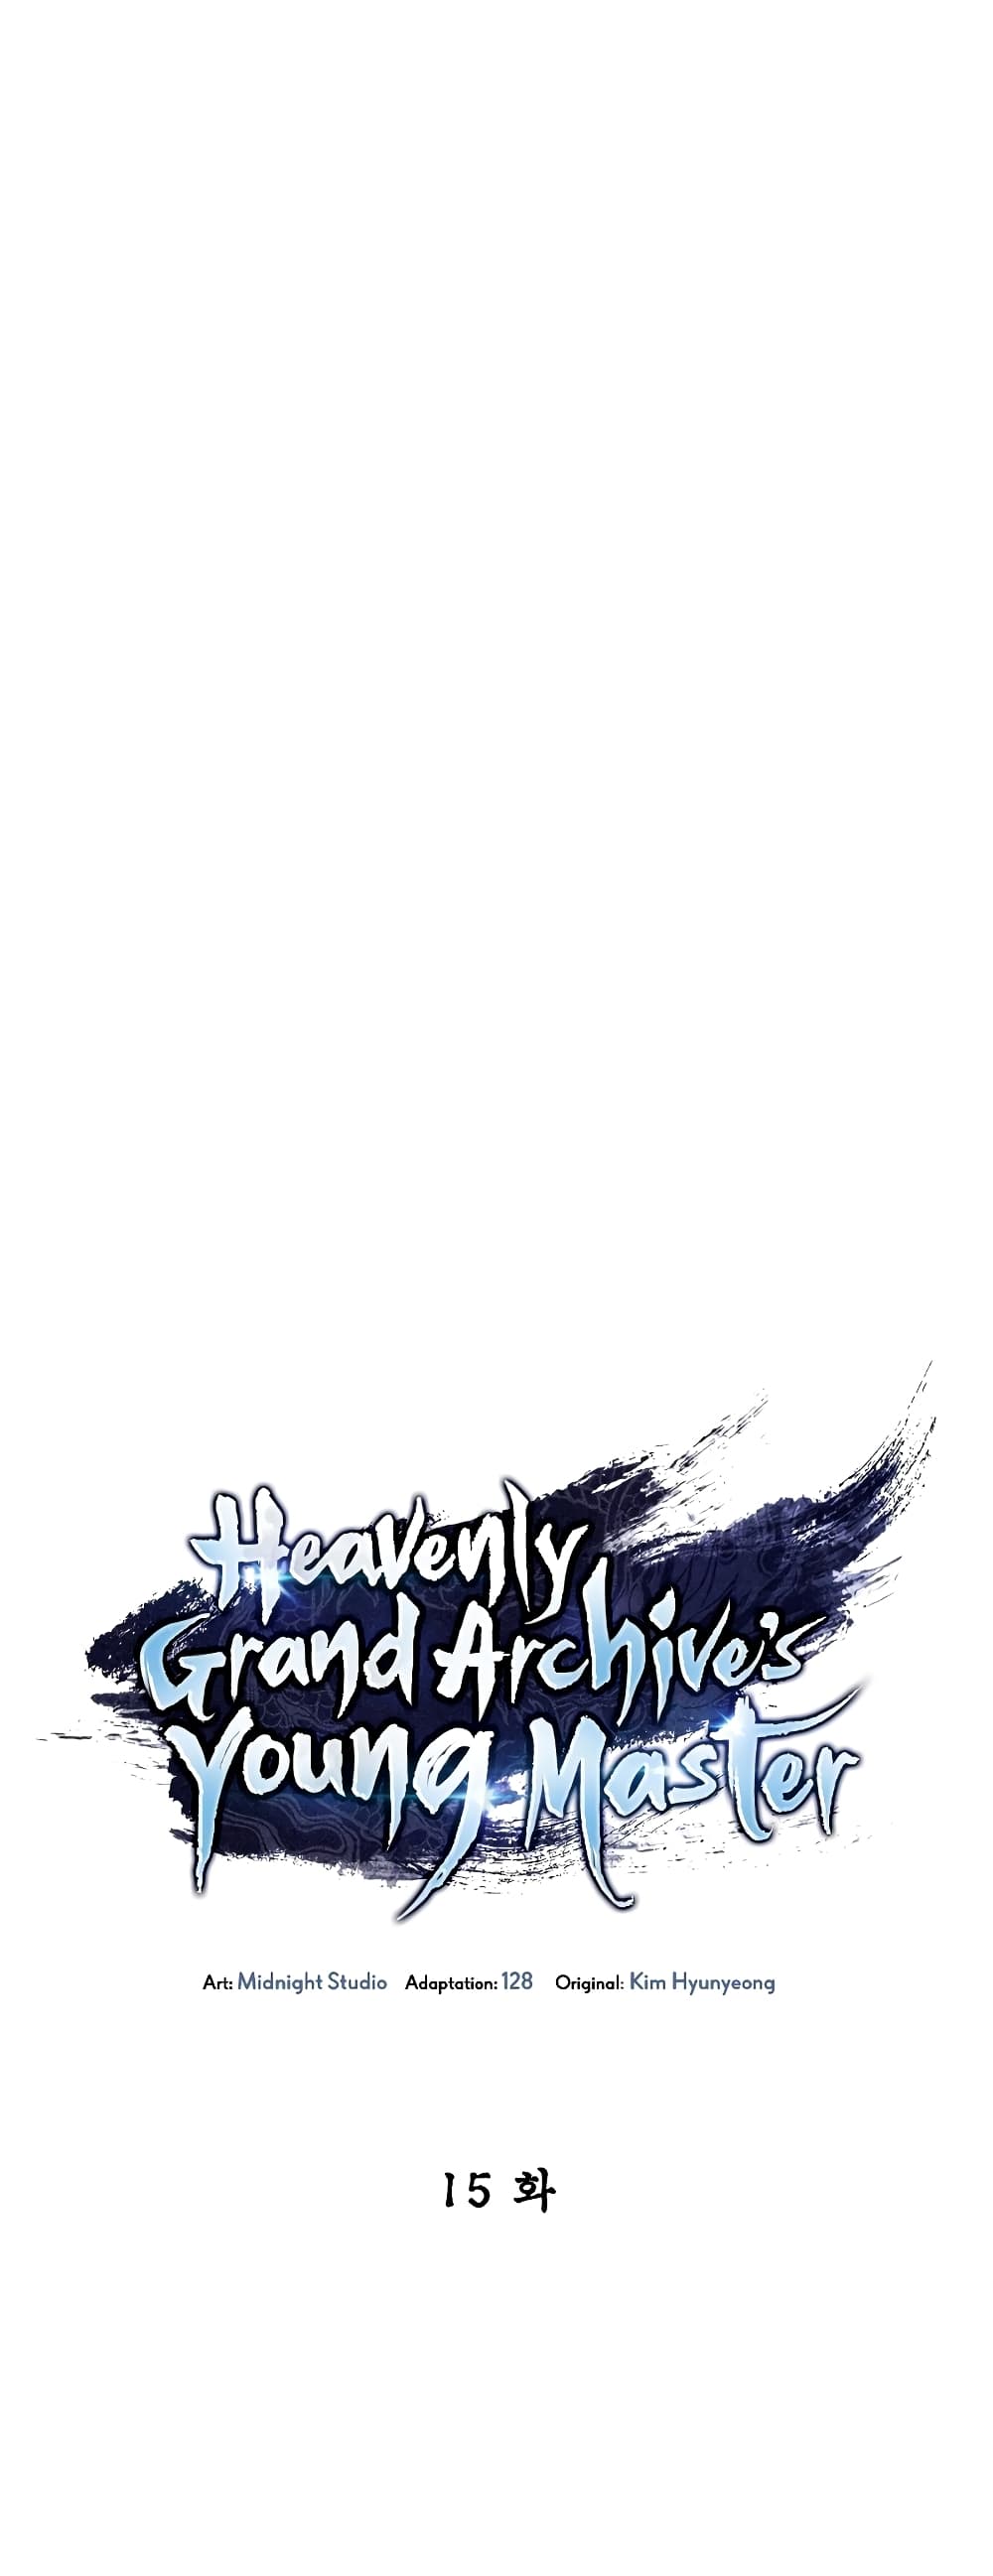 Heavenly Grand Archive’s Young Master 15 (2)